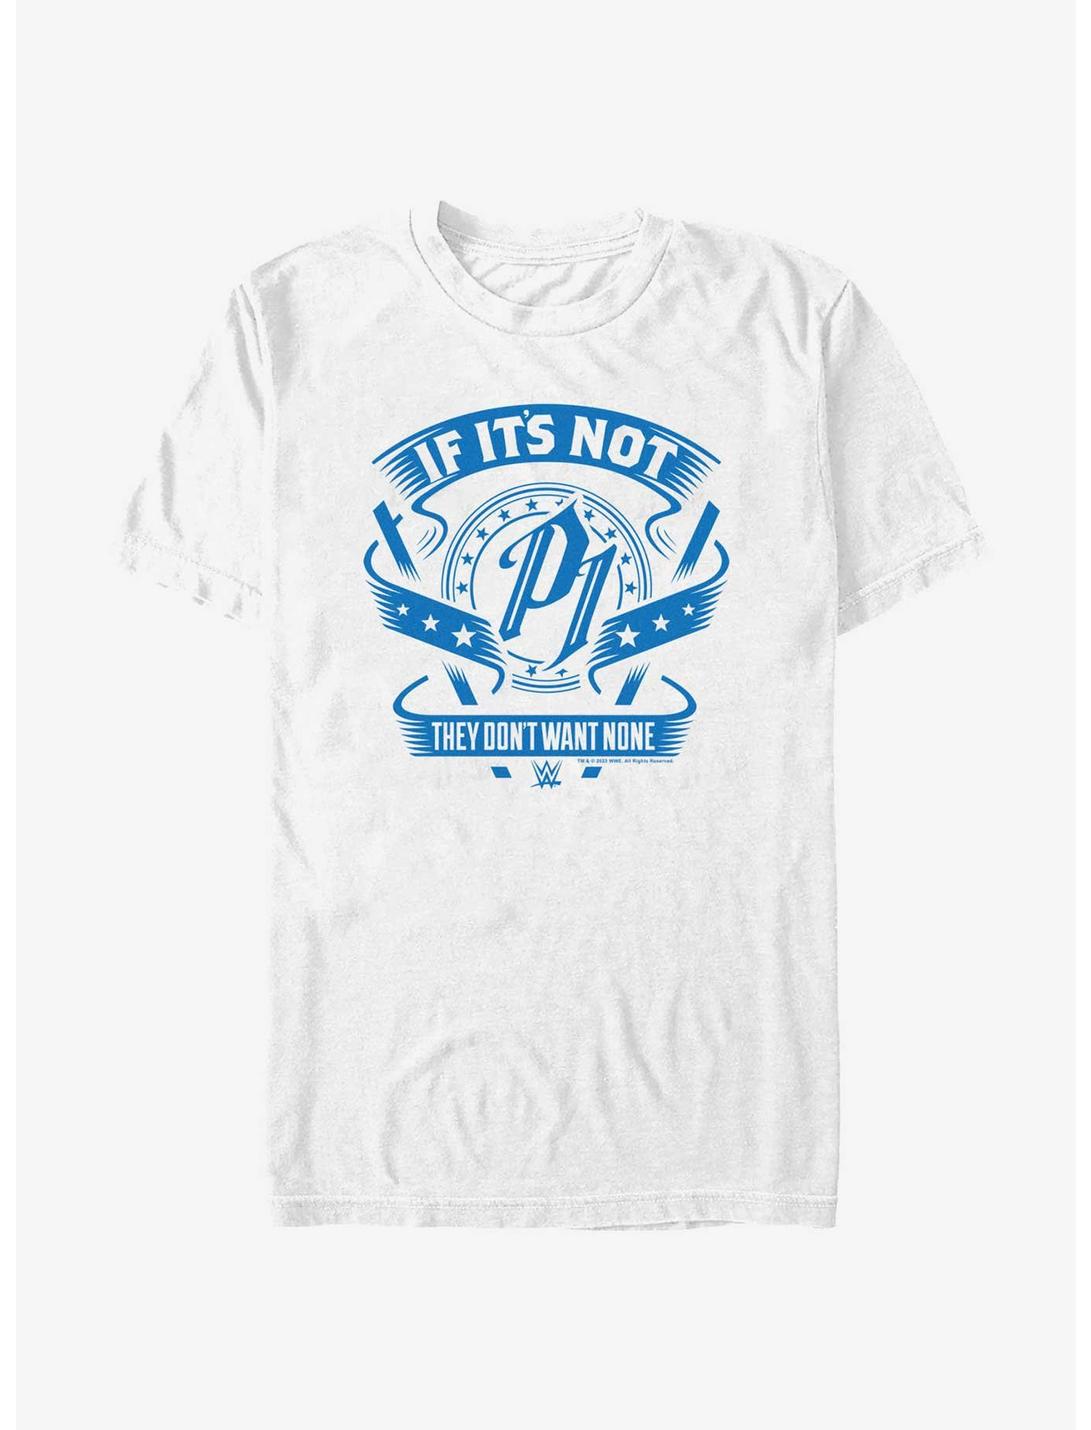 WWE AJ Styles They Don't Want None T-Shirt, WHITE, hi-res